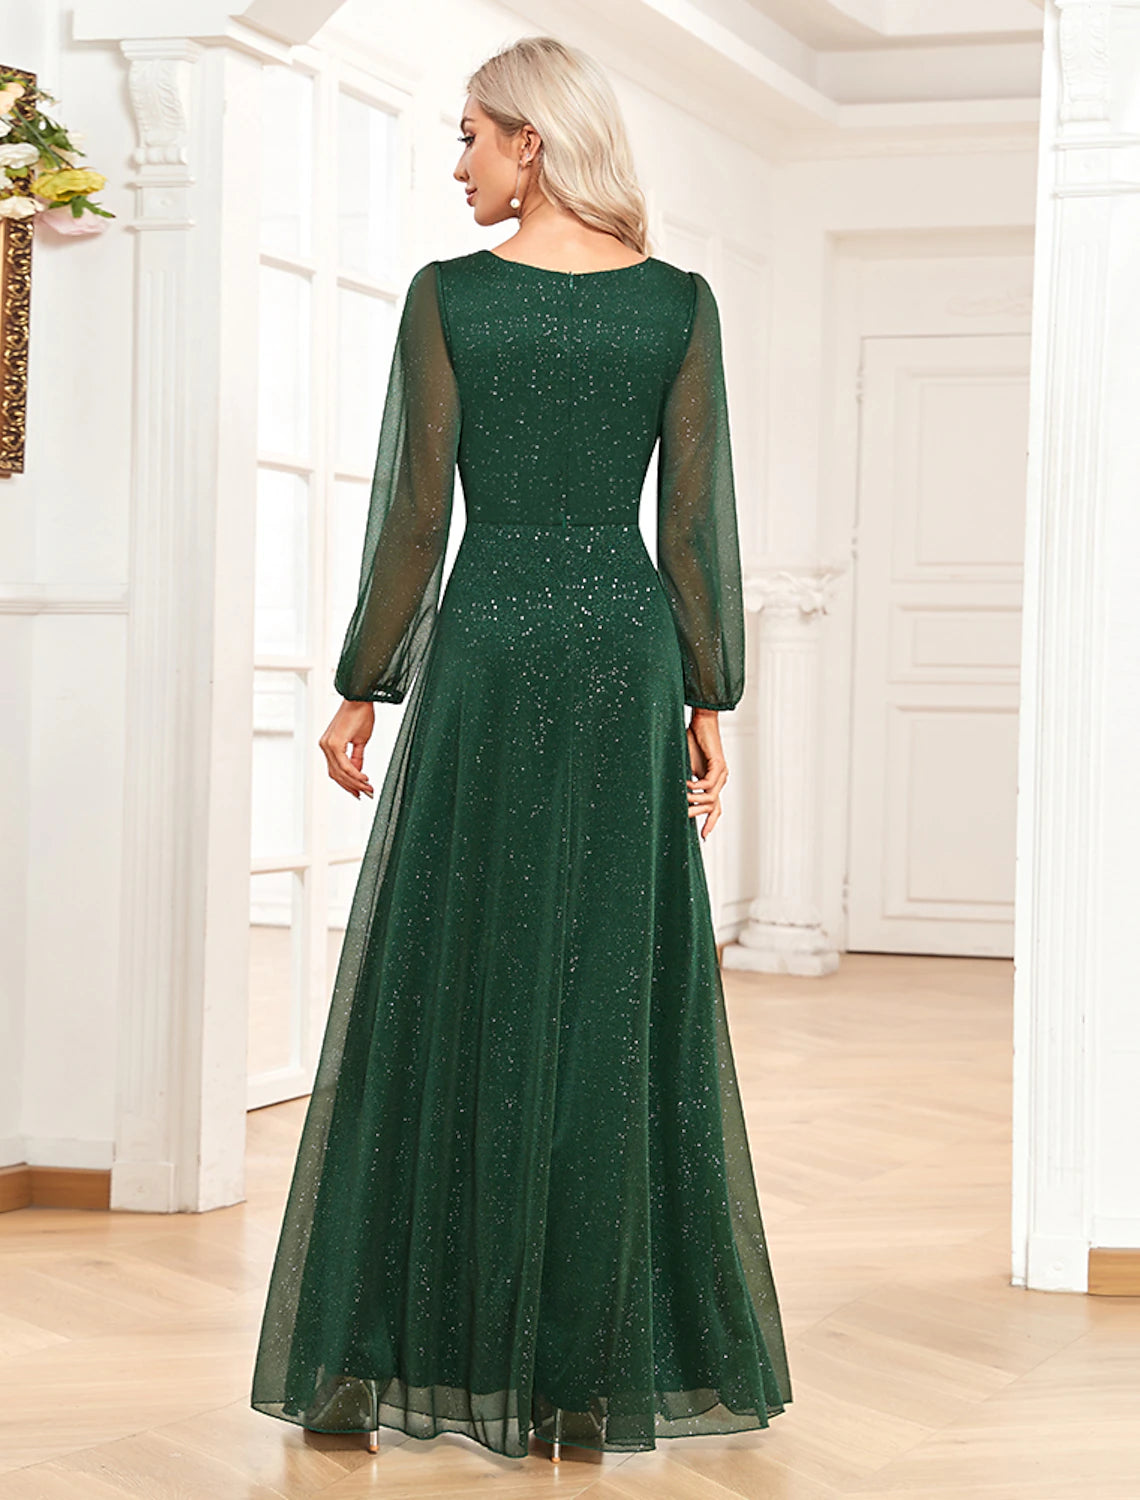 A-Line Evening Gown Elegant Dress Formal Floor Length Long Sleeve V Neck Chiffon with Sequin